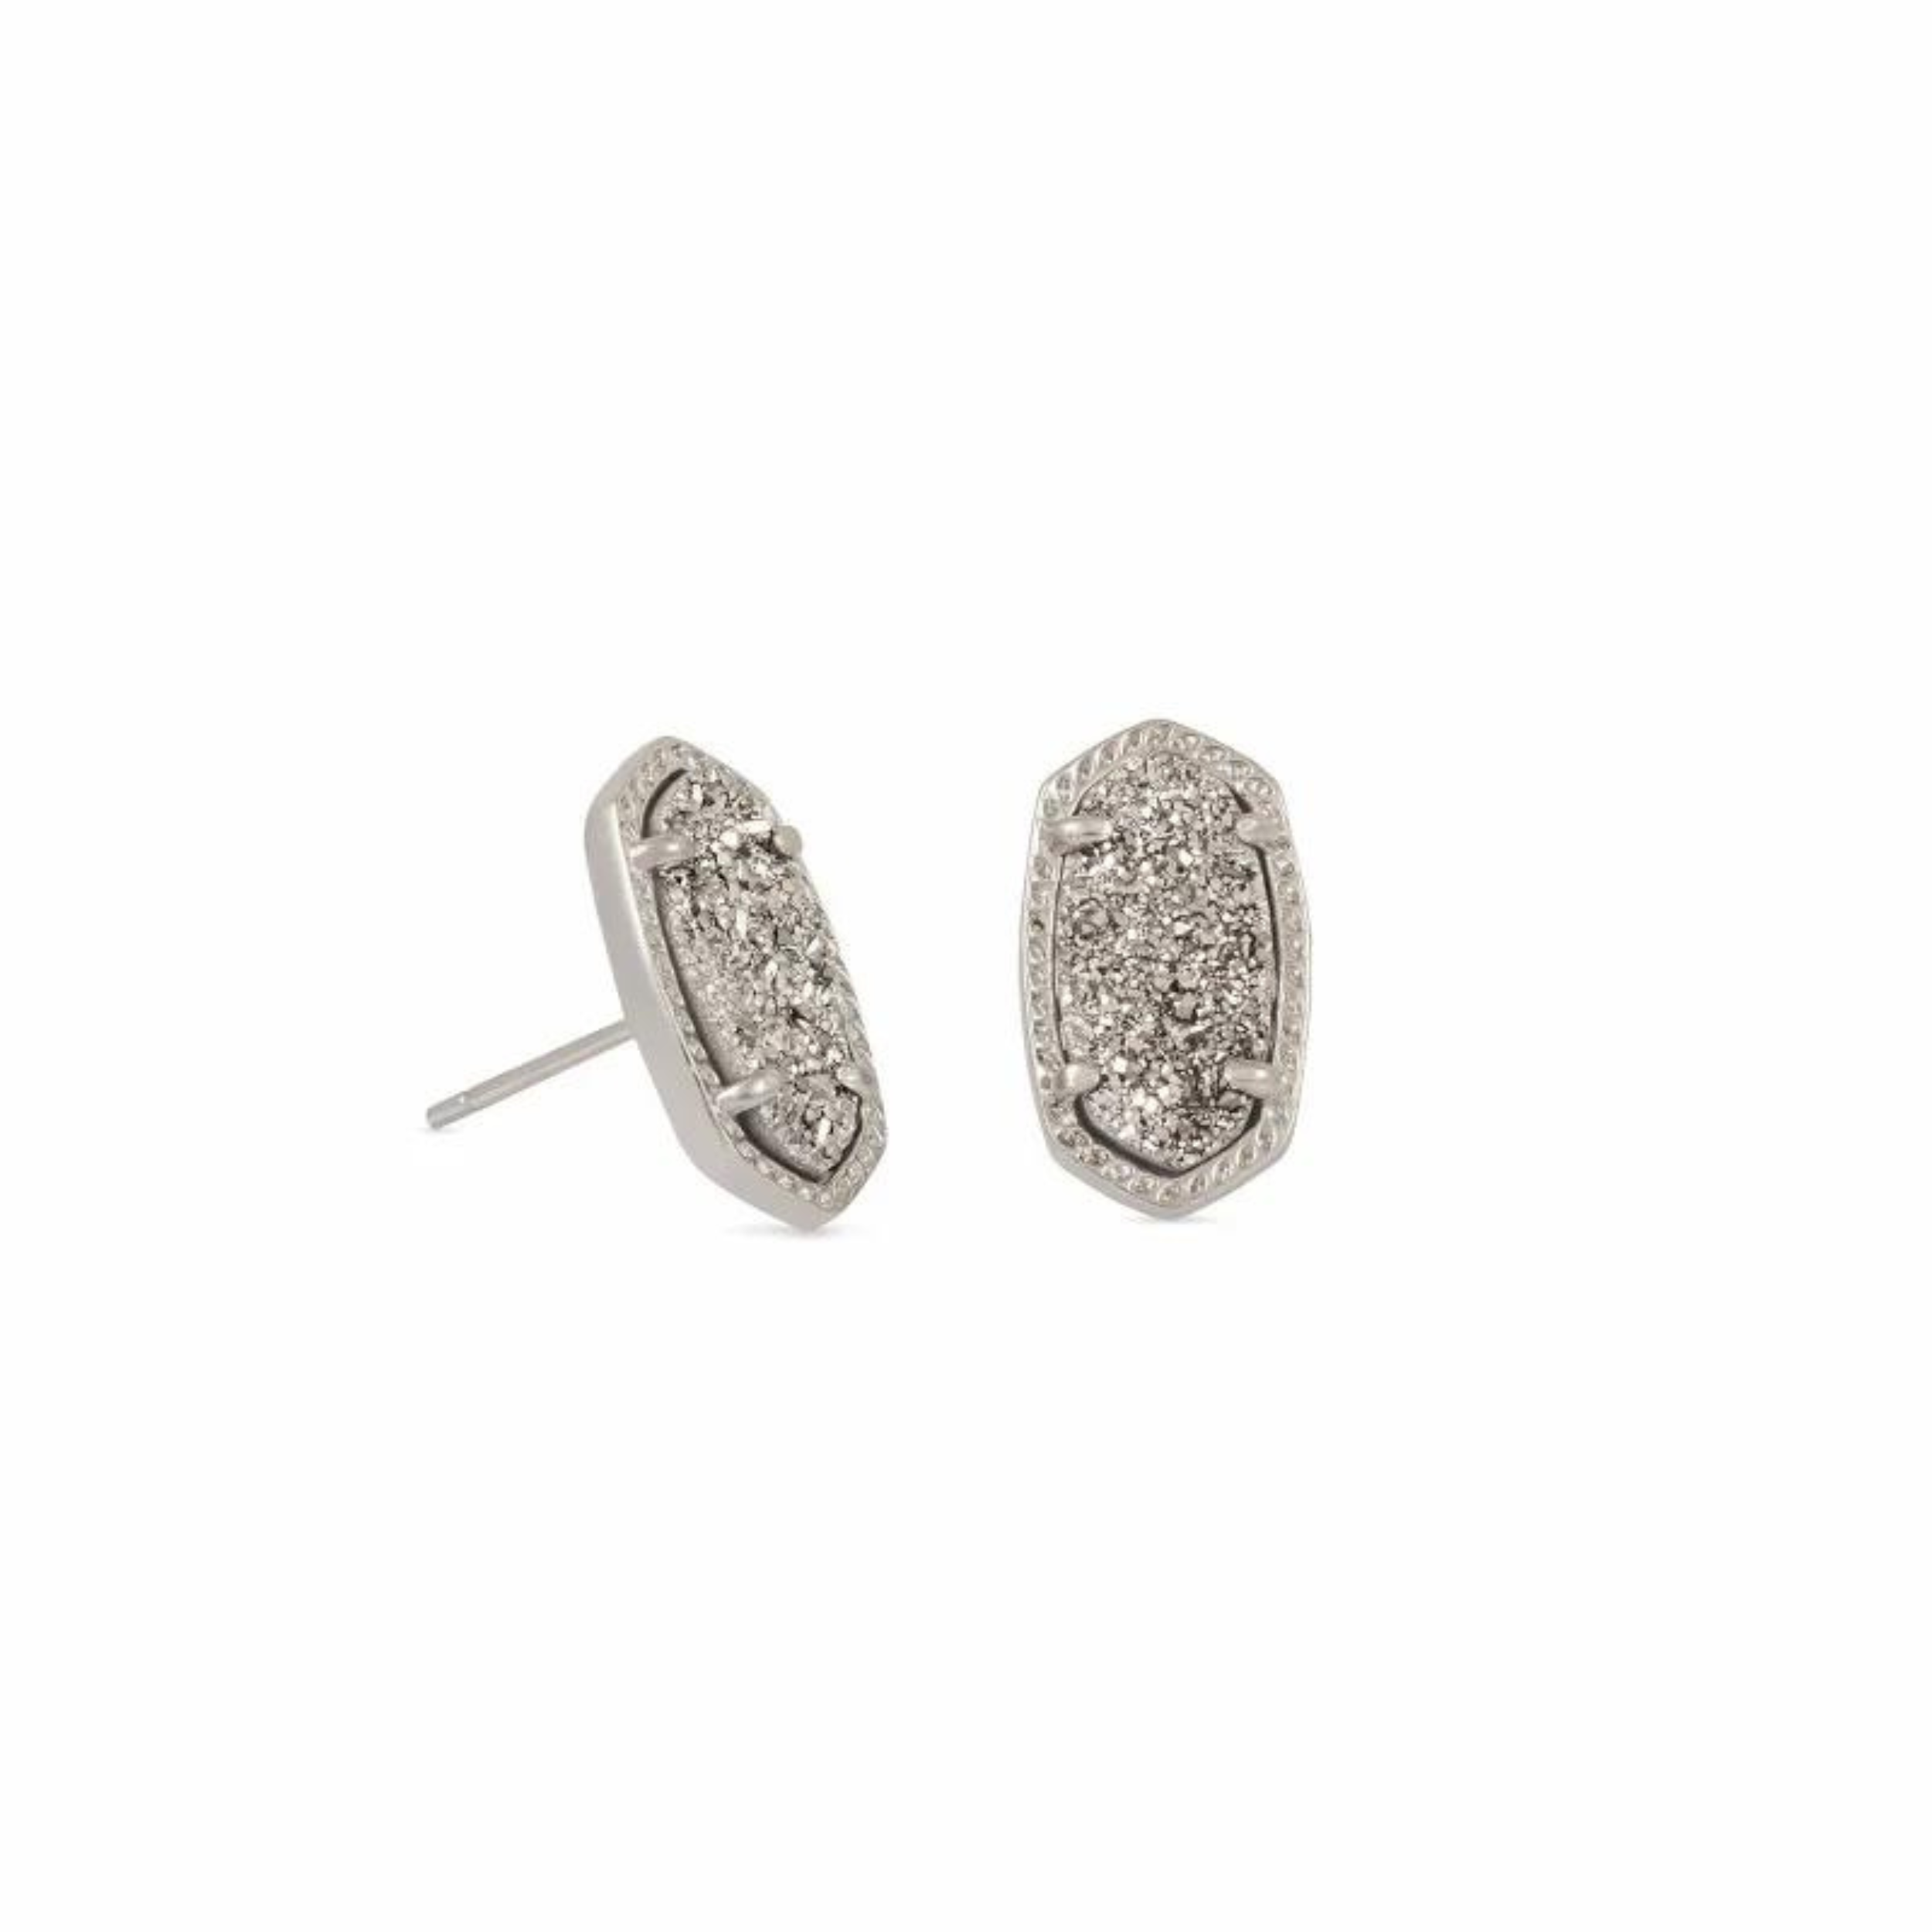 Kendra Scott | Ellie Silver Stud Earrings in Platinum Drusy - Giddy Up Glamour Boutique